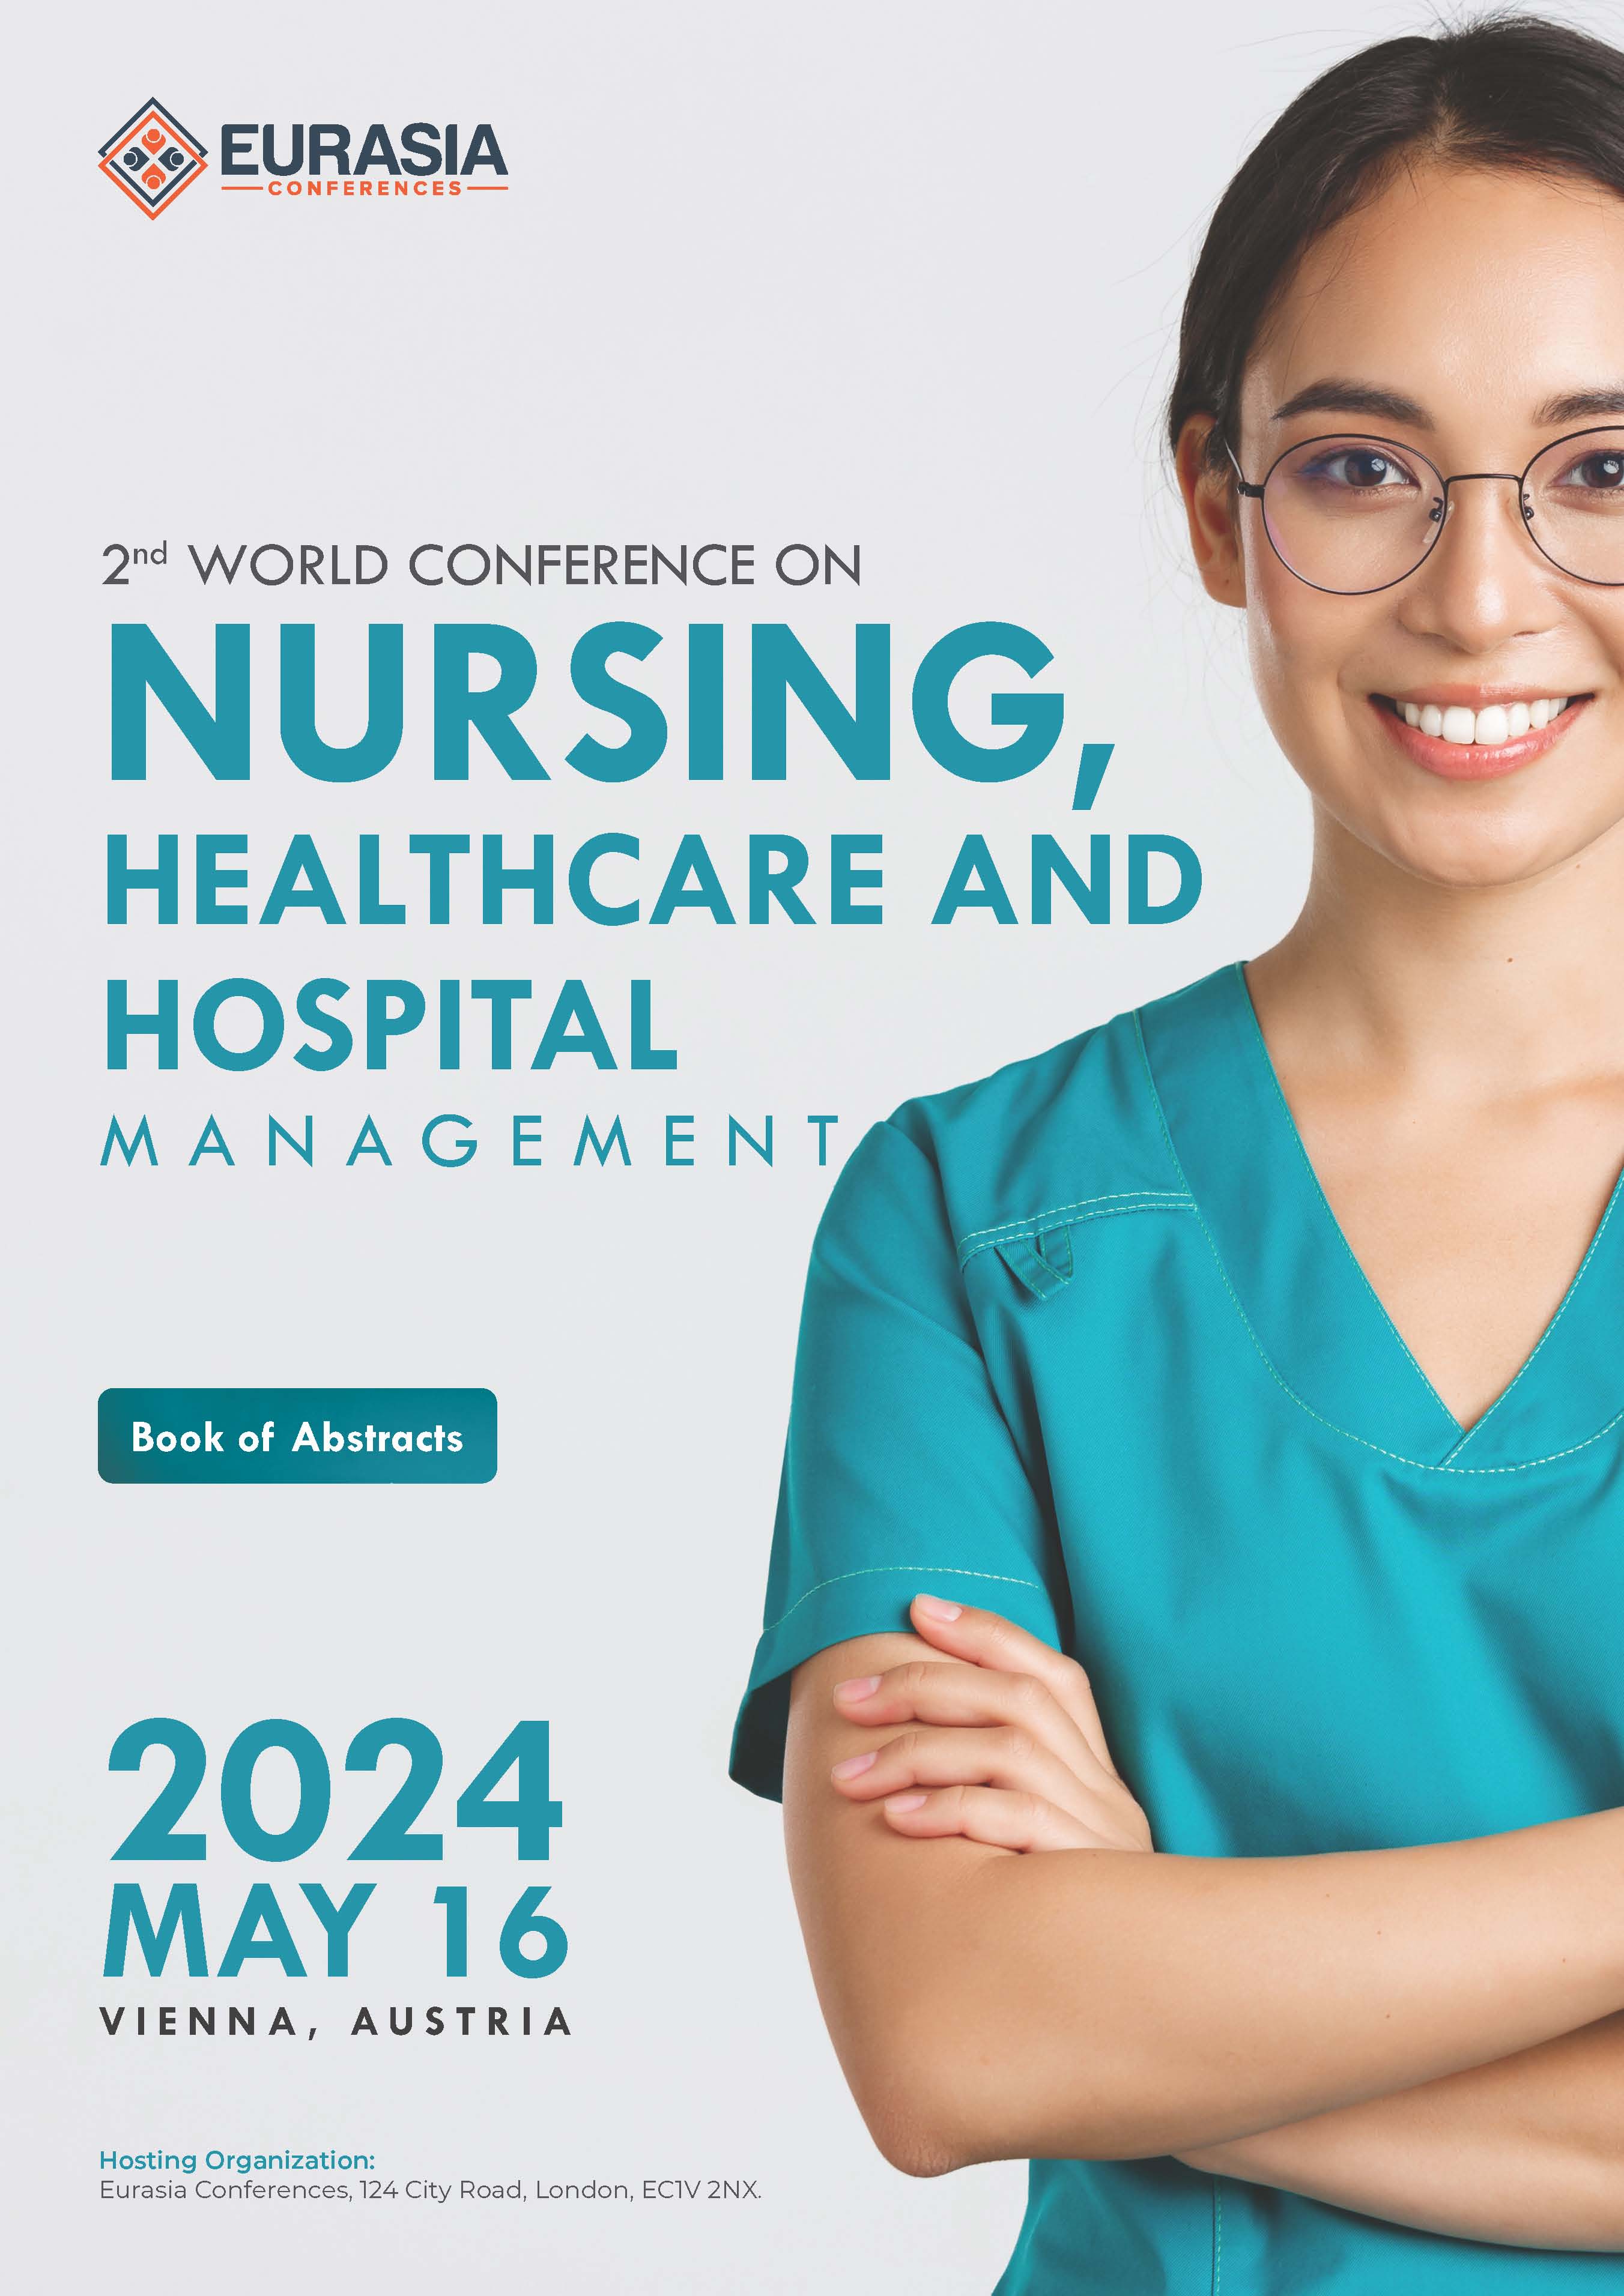 Abstracts of the 2nd World Conference on Nursing, Healthcare and Hospital Management